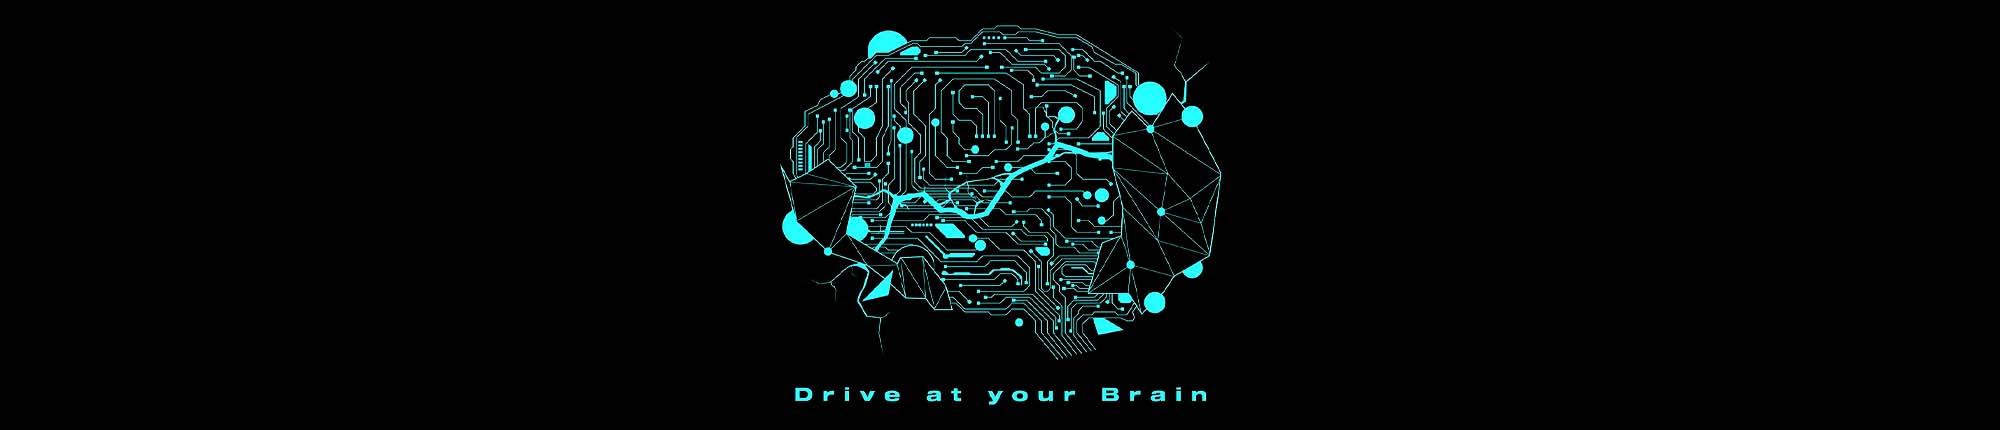 Drive at your Brain